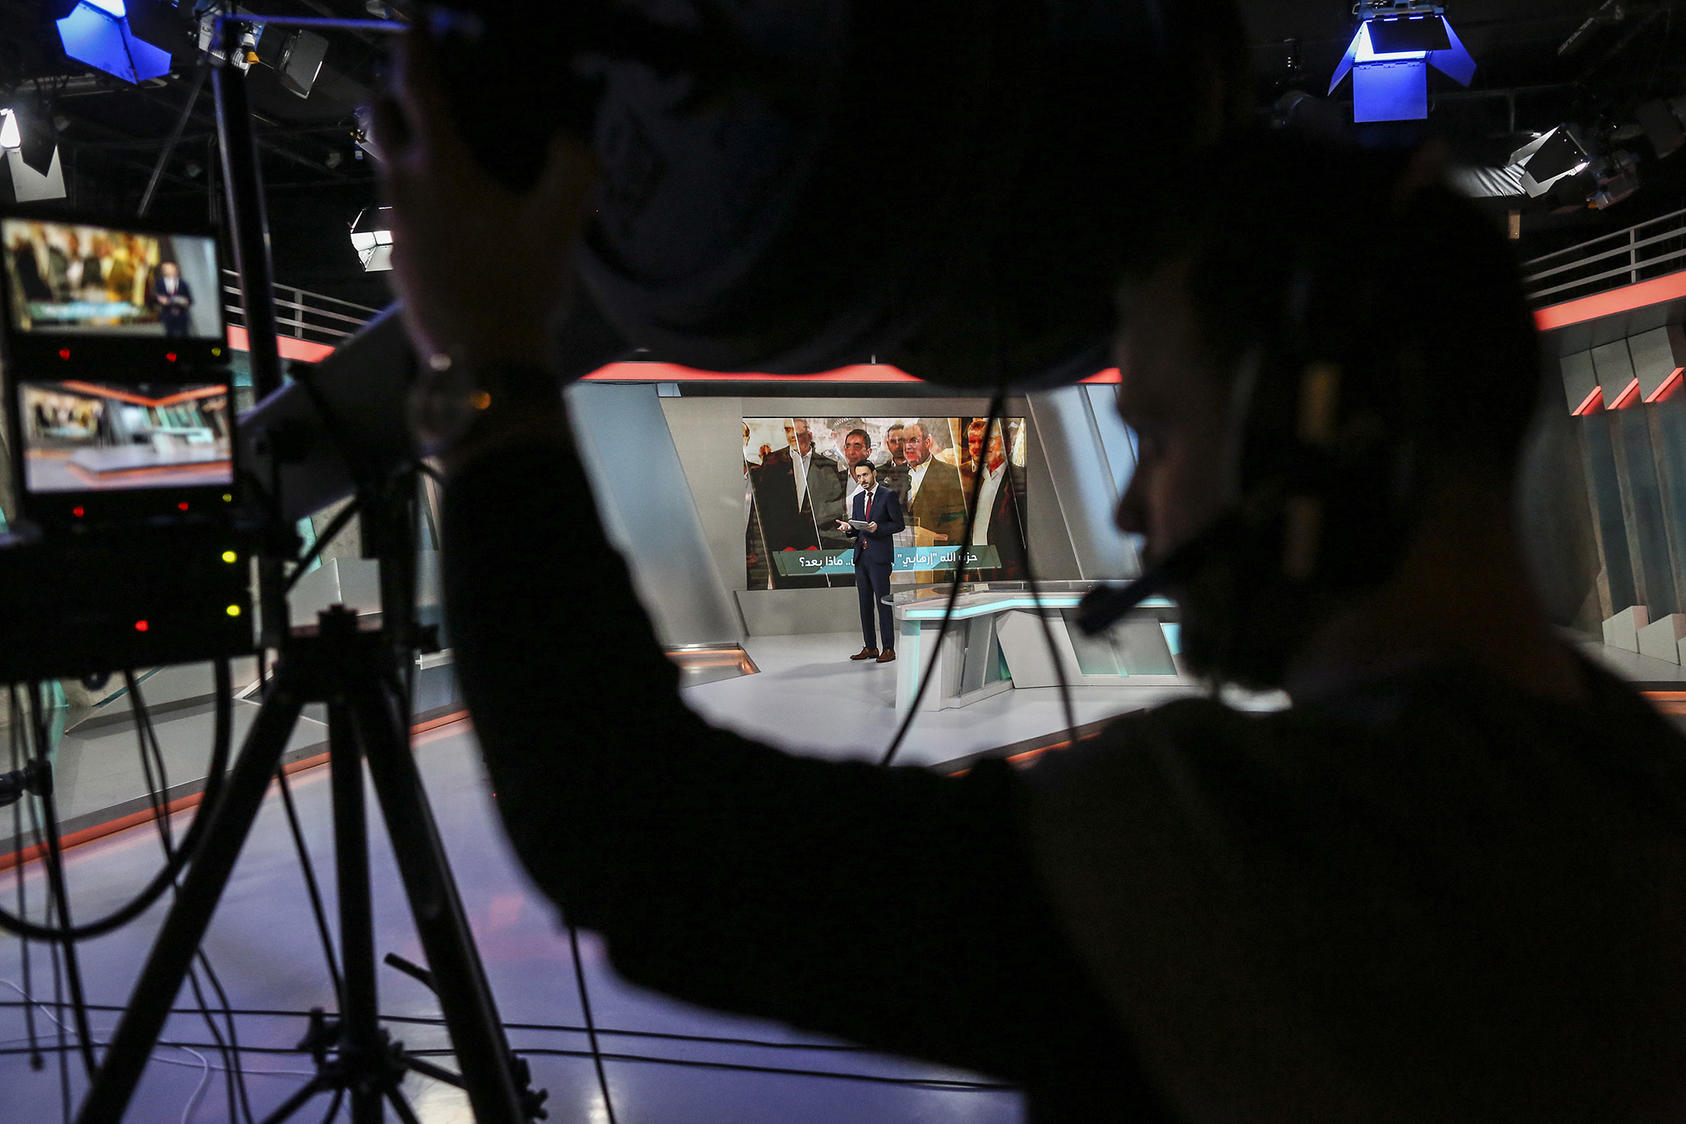 A Syrian TV news program broadcasting from Istanbul, Feb. 25, 2019. (Tara Todras-Whitehill/The New York Times)